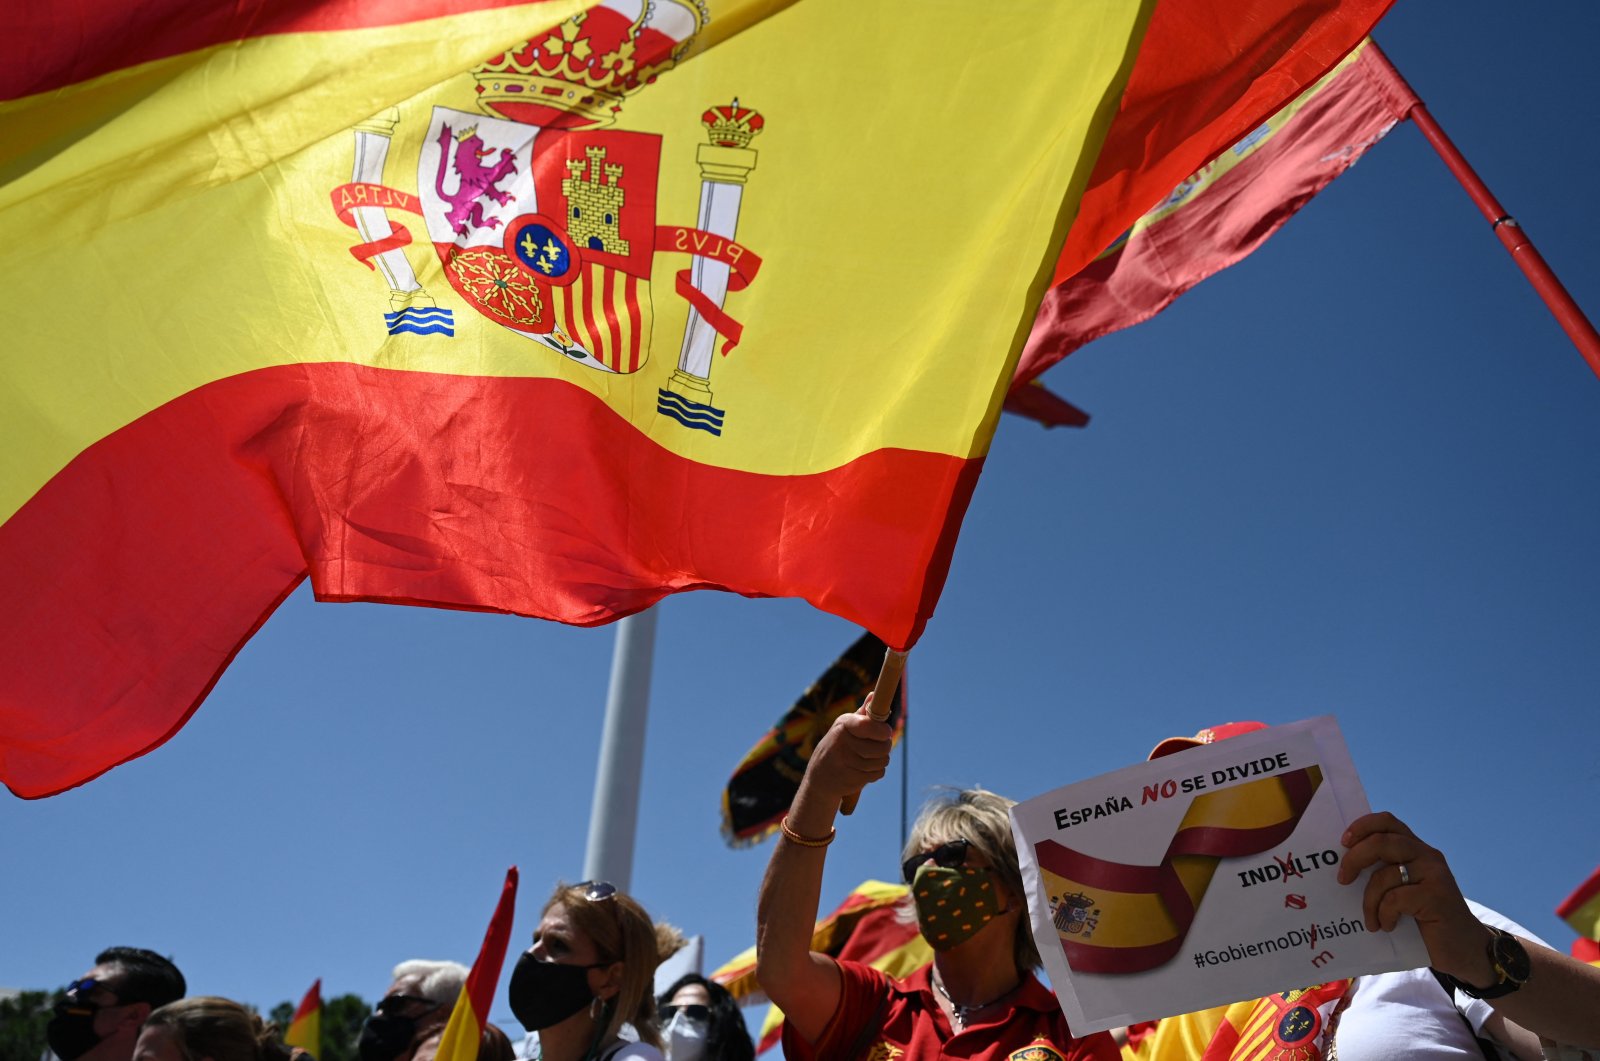 People wave Spanish flags during a protest by right-wing protesters to denounce the government's plans to offer pardons to the jailed Catalan politicians behind the failed 2017 independence bid, in Madrid, Spain, June 13, 2021. (AFP Photo)